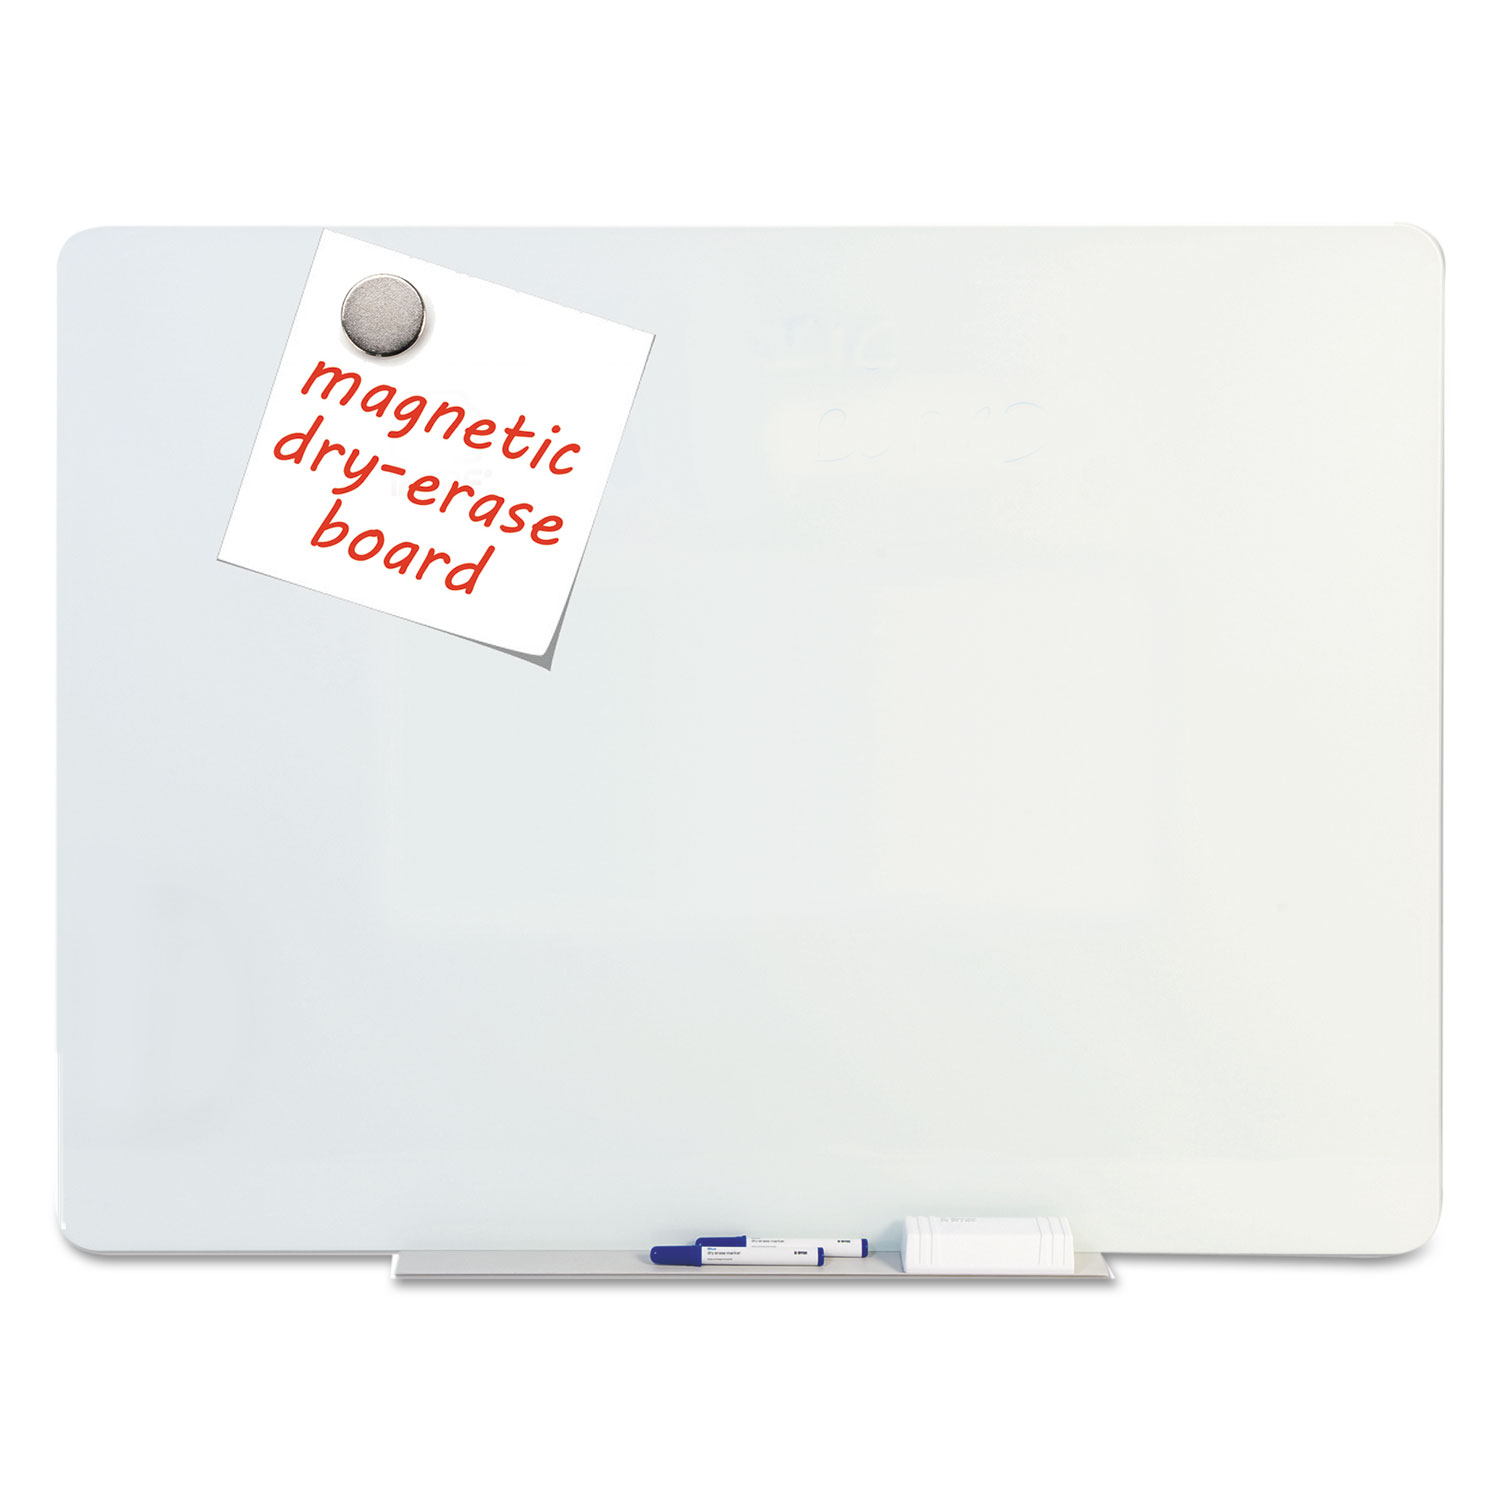  MasterVision GL070101 Magnetic Glass Dry Erase Board, Opaque White, 36 x 24 (BVCGL070101) 